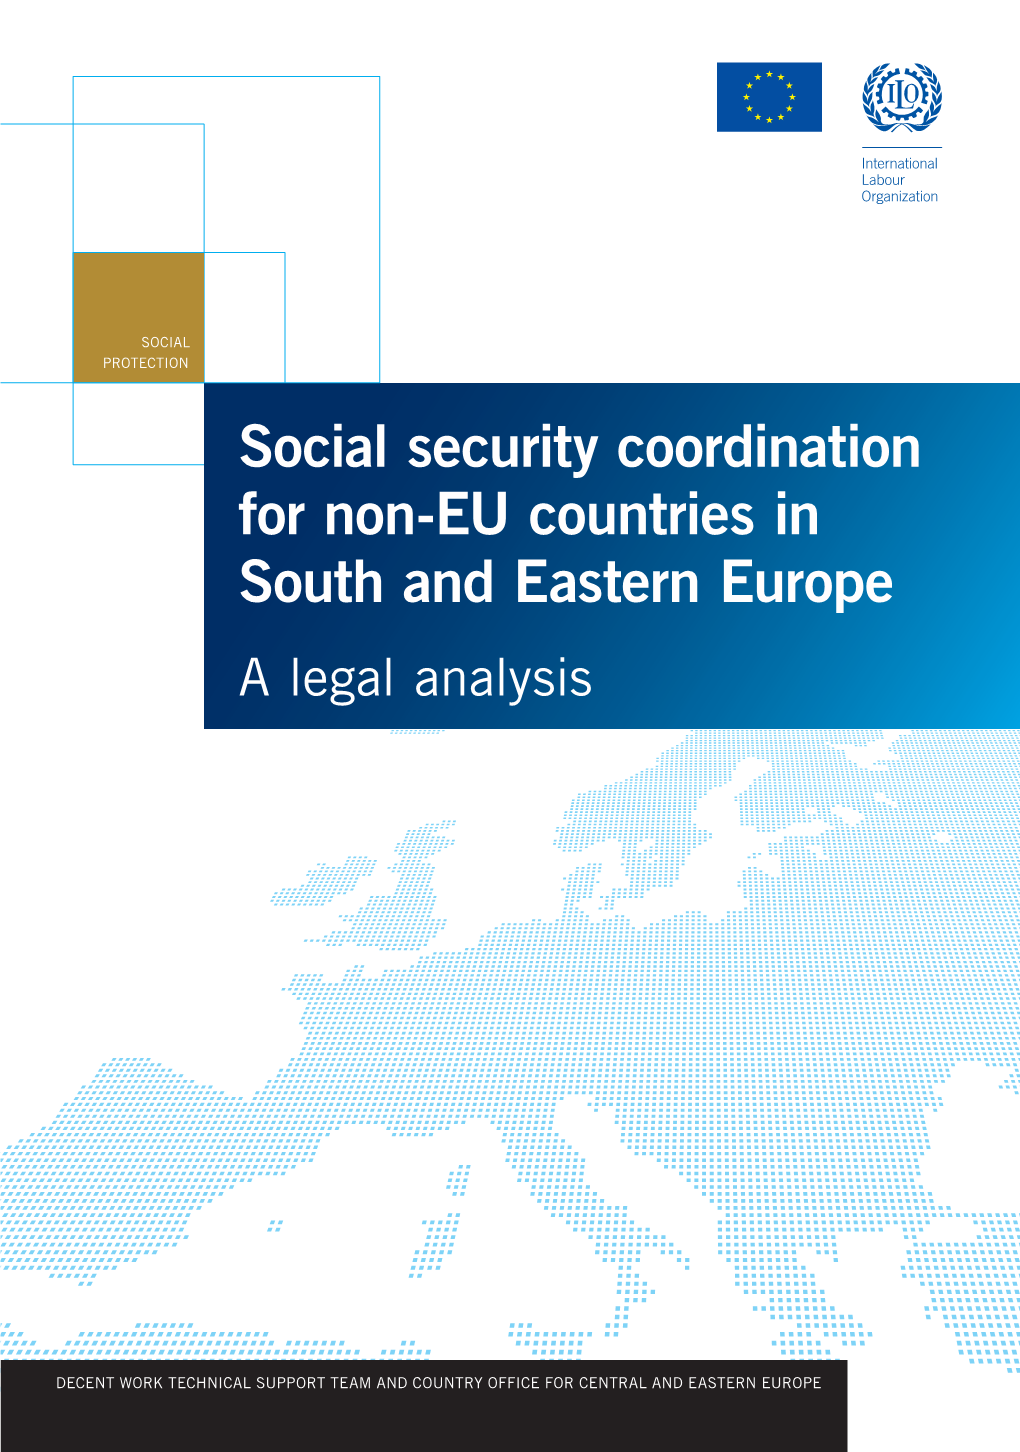 Social Security Coordination for Non-EU Countries in South and Eastern Europe a Legal Analysis